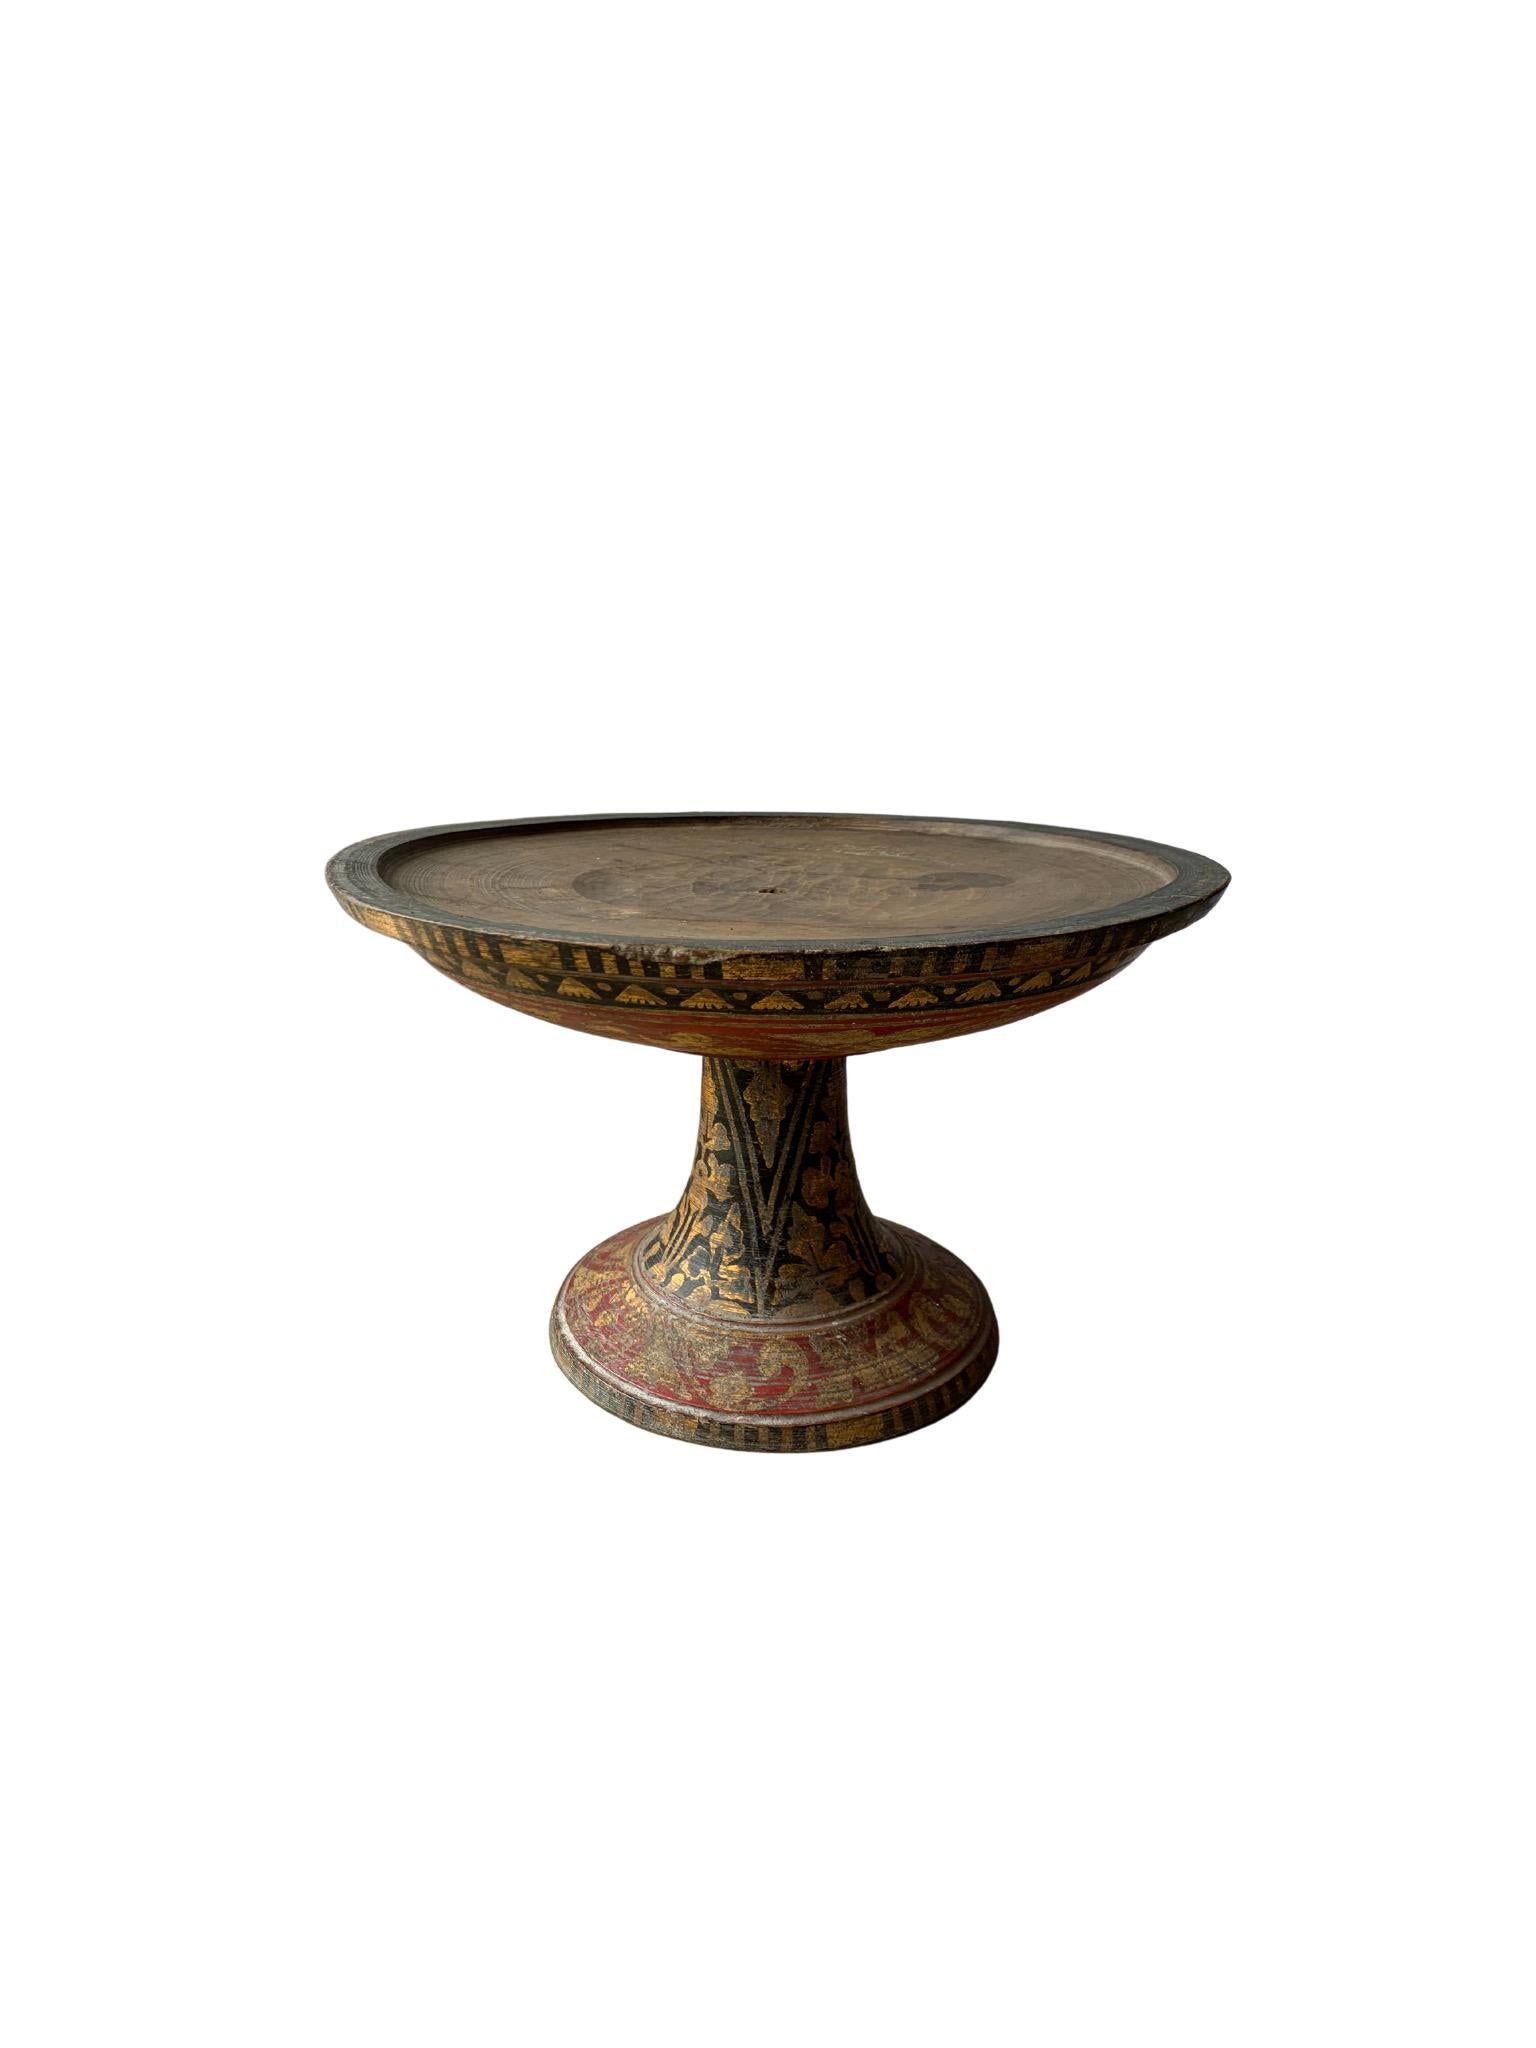 Hand-Carved Balinese Offering Bowl 'Dulang' with Floral Motif